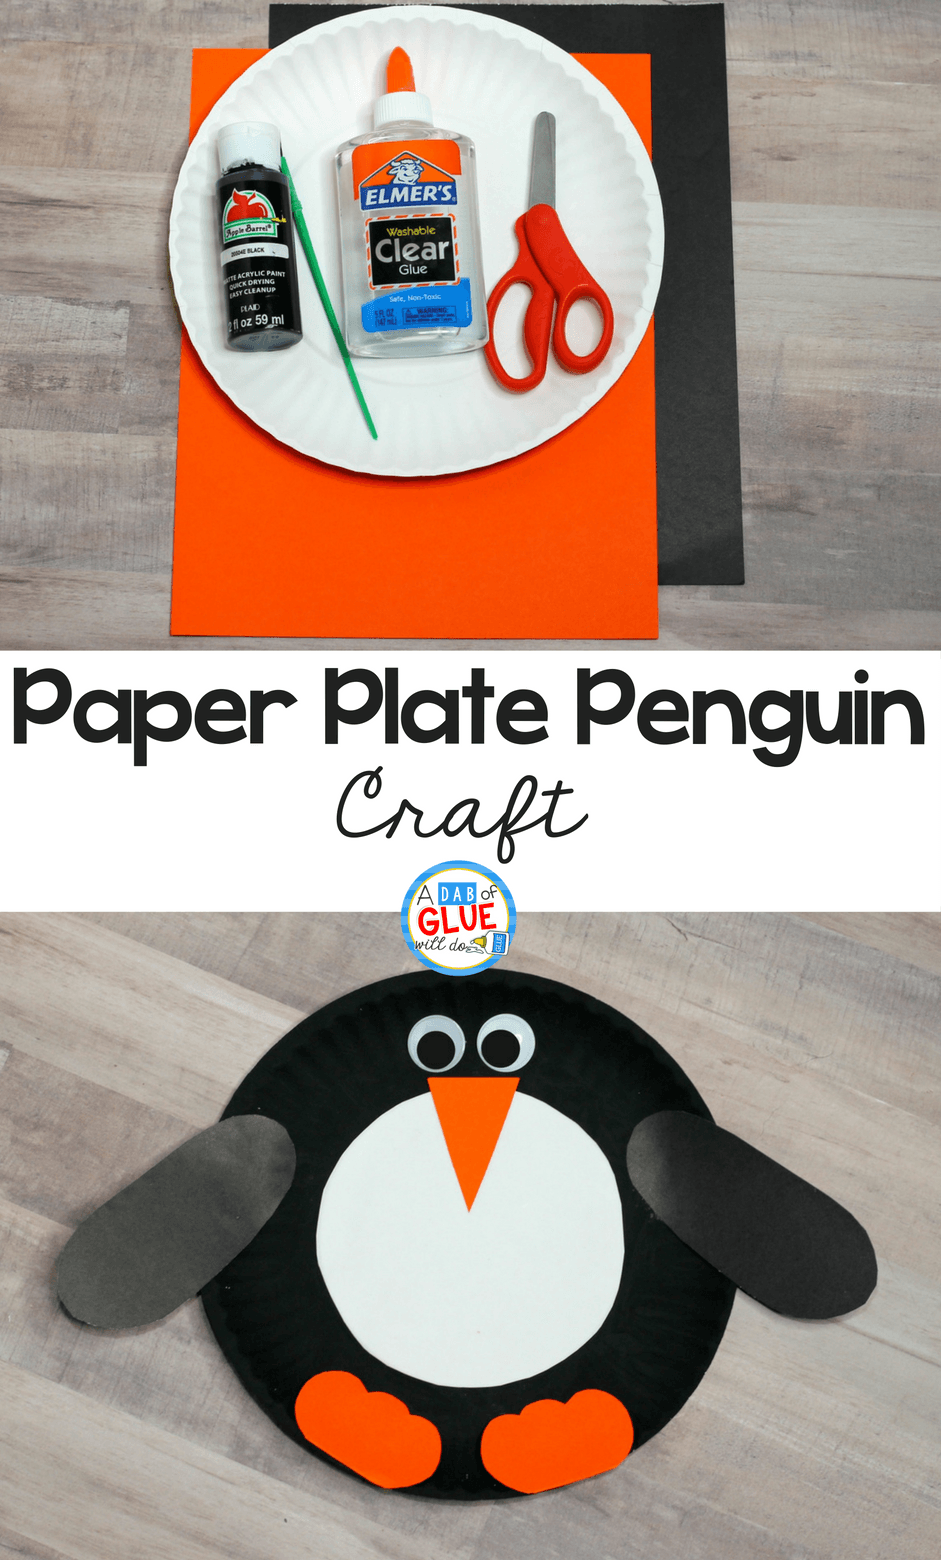 Penguin in Orange Oval Logo - How To Make A Paper Plate Penguin Craft For Your Unit Study